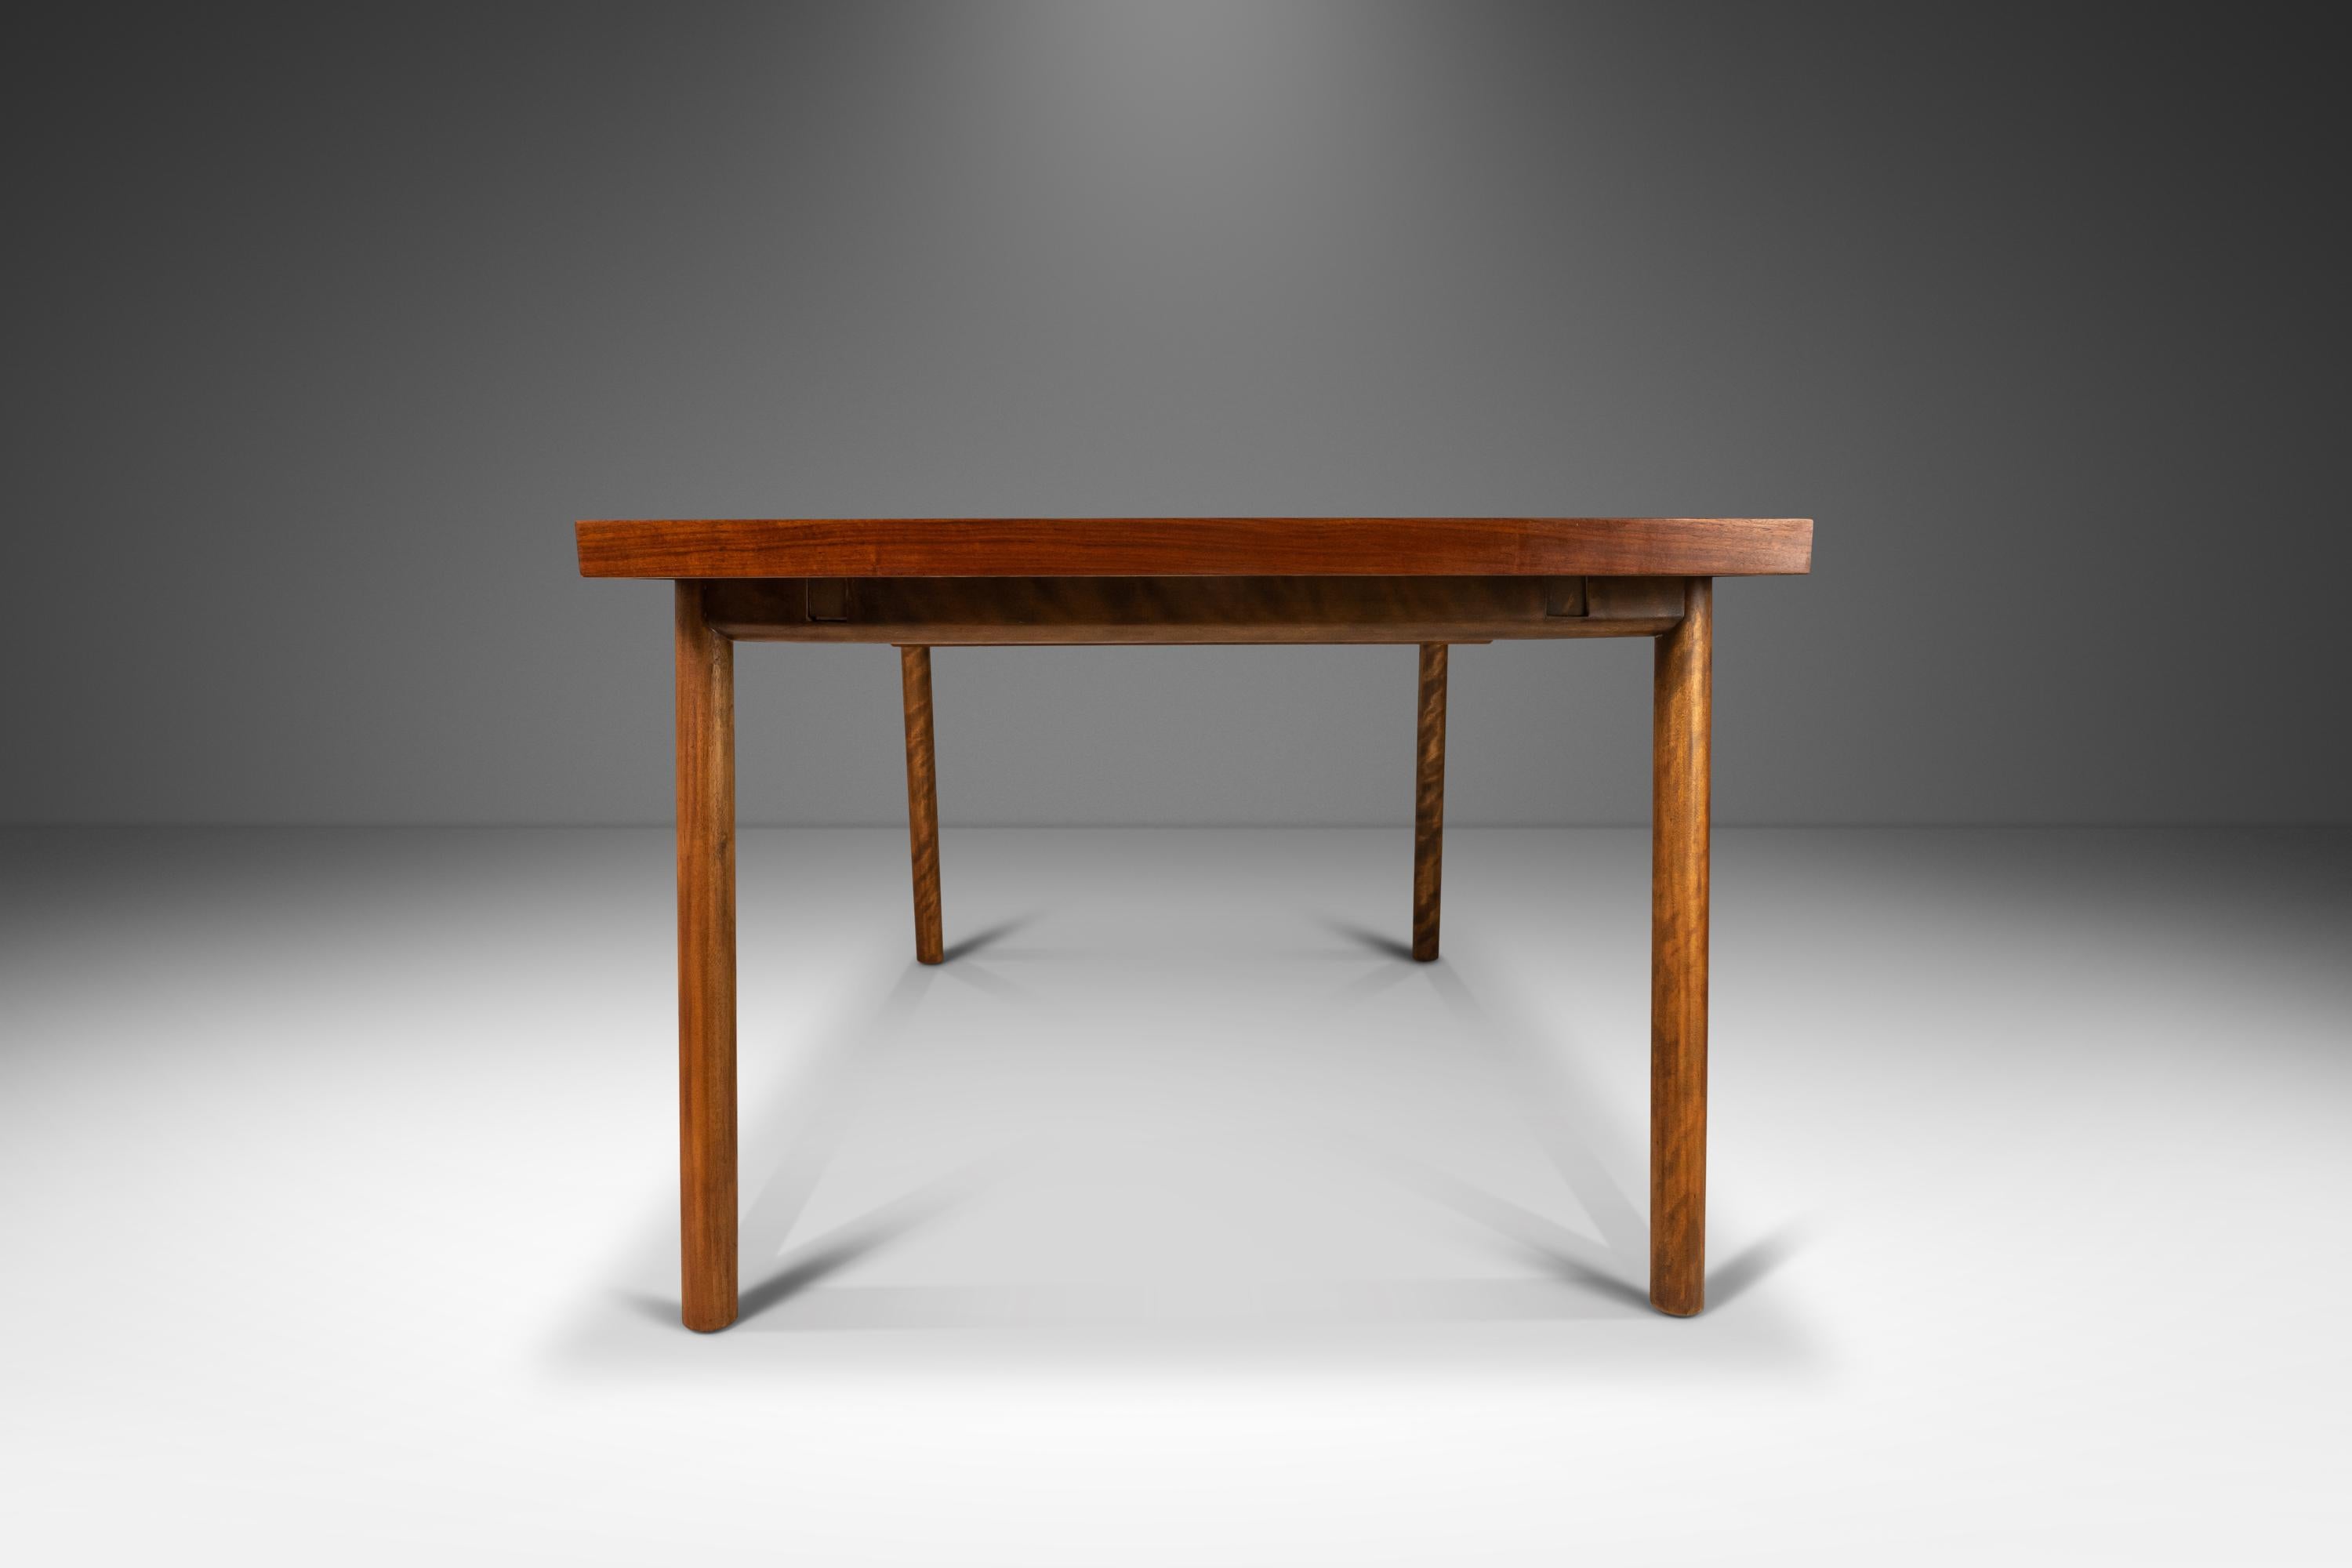 Mid-20th Century Expansion Dining Table in Walnut by T.H. Robsjohn-Gibbings for Widdicomb, 1950's